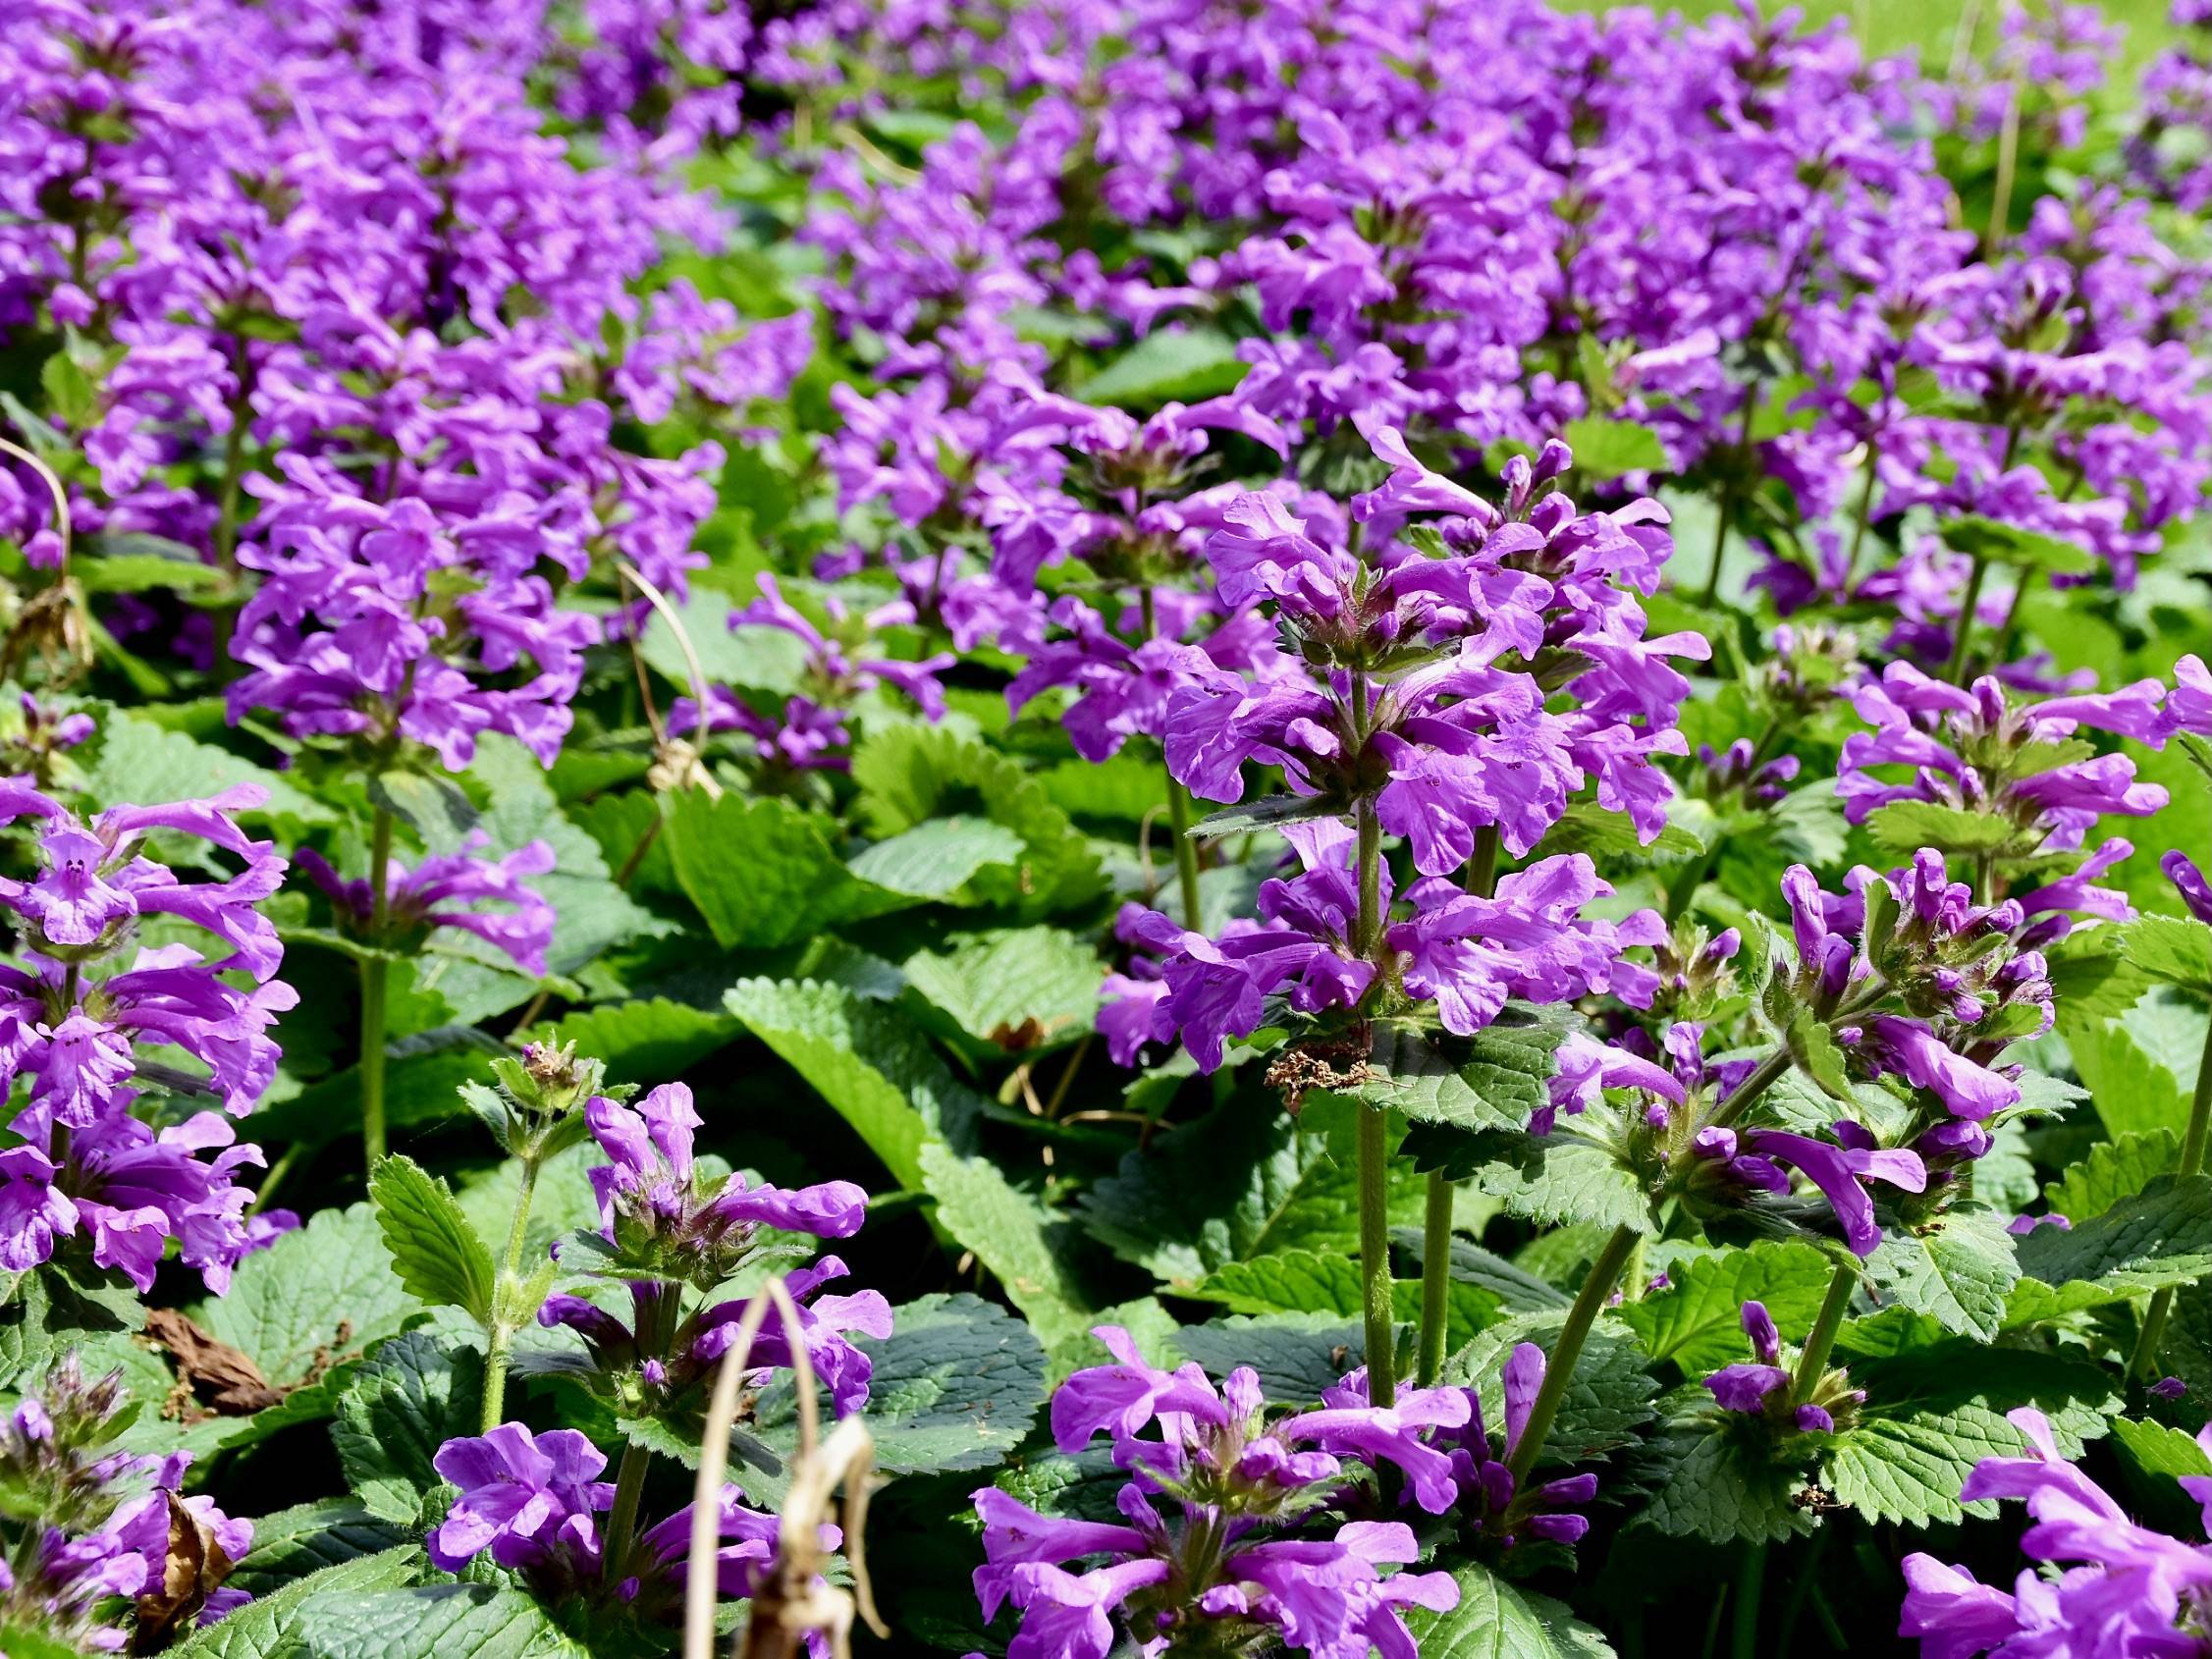 purple flowers with green leaves and stems